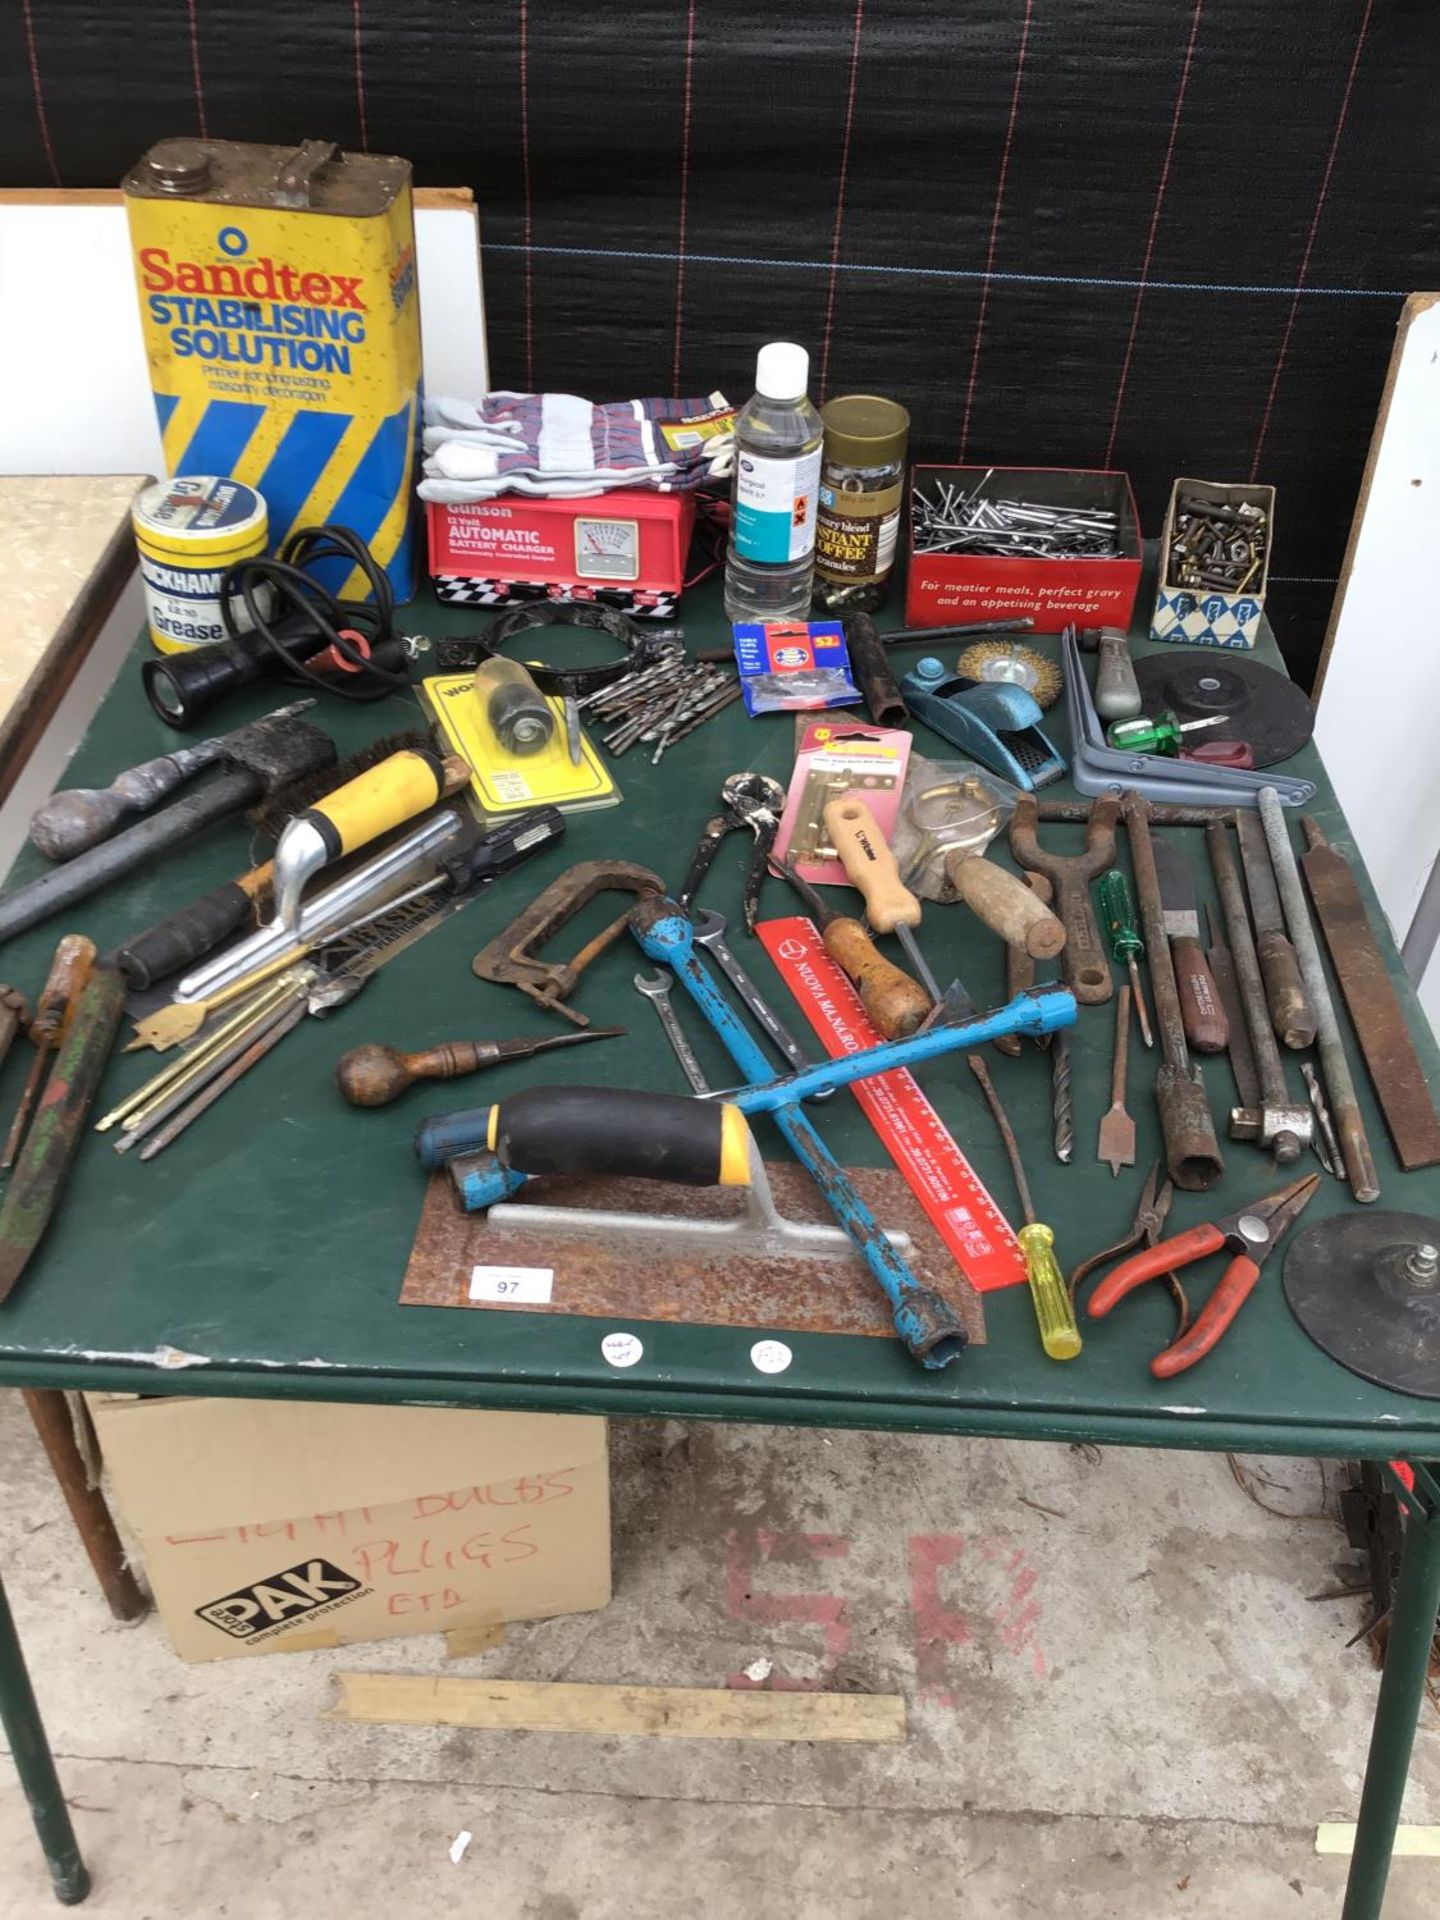 A LARGE COLLECTION OF TOOLS TO INCLUDE SAWS, DRILL BITS, PLIERS, BATTERY CHARGER ETC